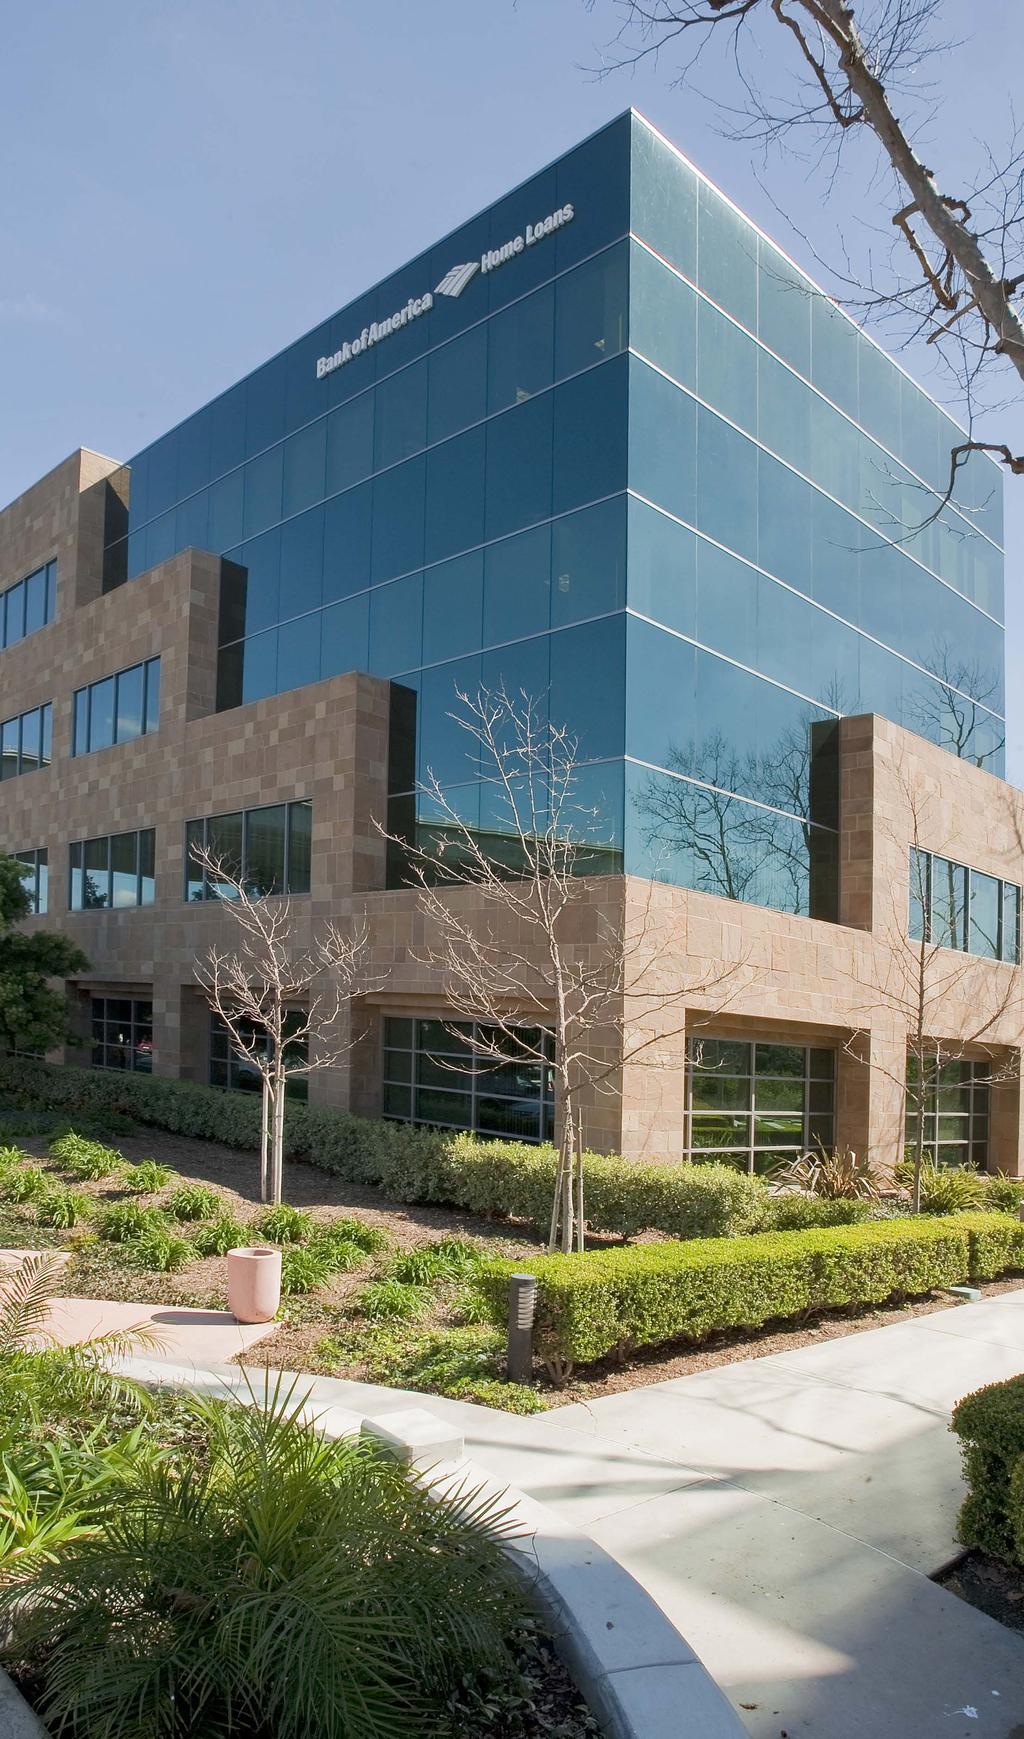 Rio 9095 is a four-story Class A office building project totaling 81,799 square feet located in Mission Valley.